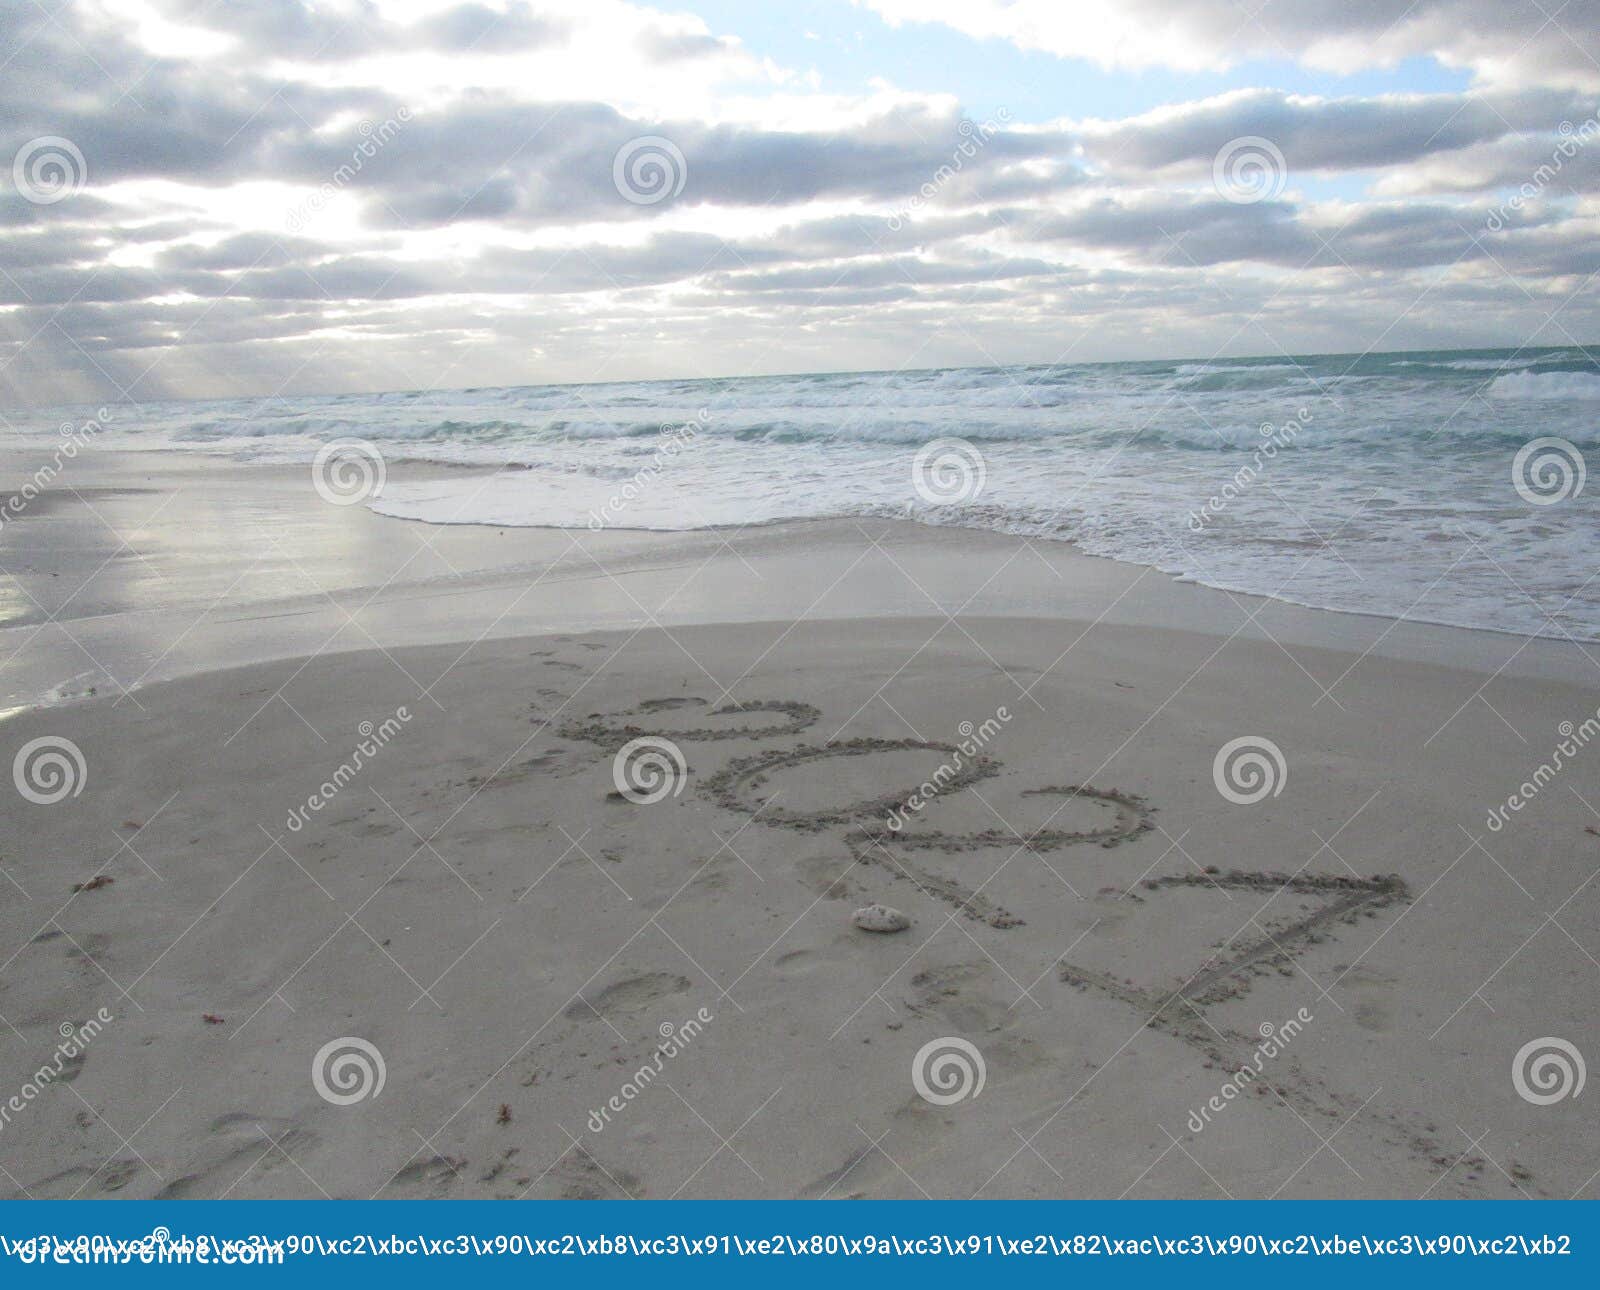 Happy New Year 2021, Lettering On The Beach With Wave And 